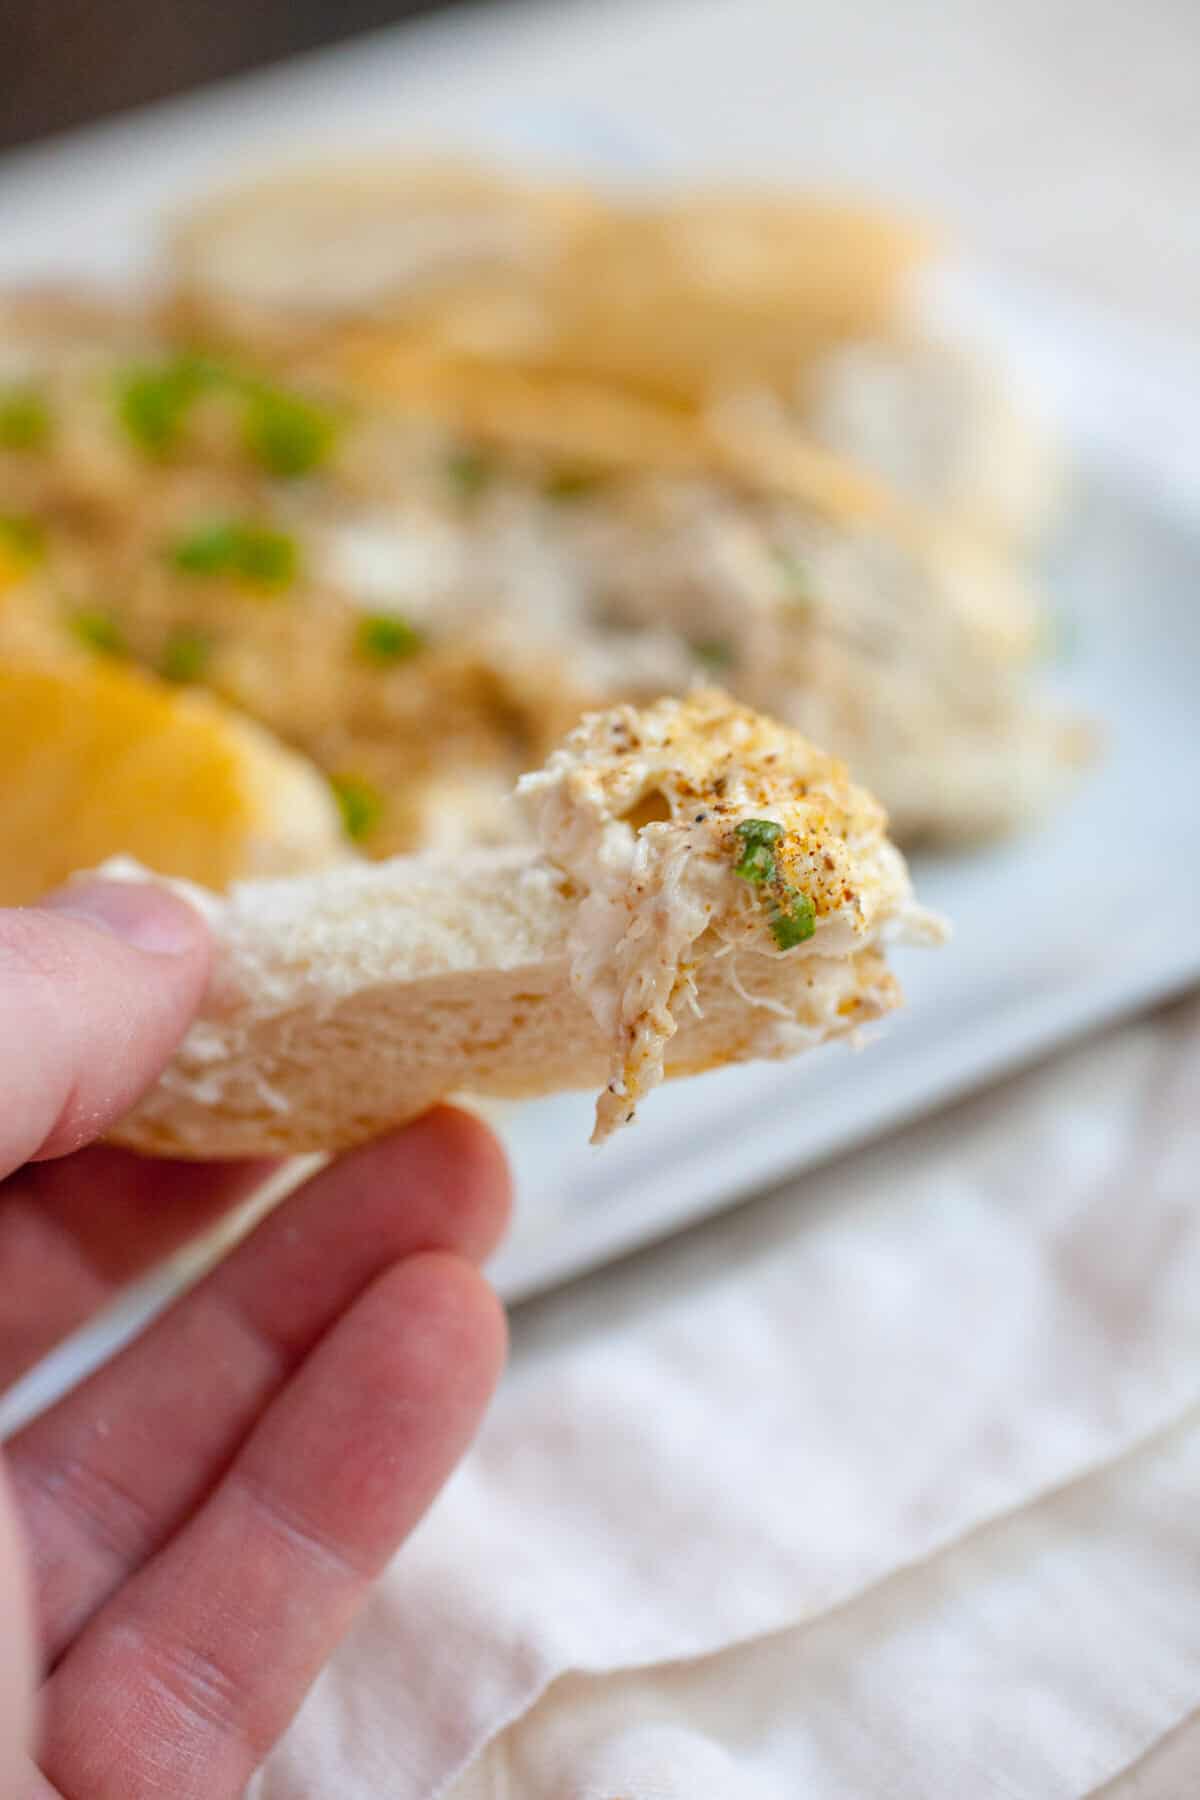 Crab Dip Stuffed French Bread: Easy crab dip stuffed and baked into a French loaf. A great party appetizer! Perfect for New Years! | macheesmo.com